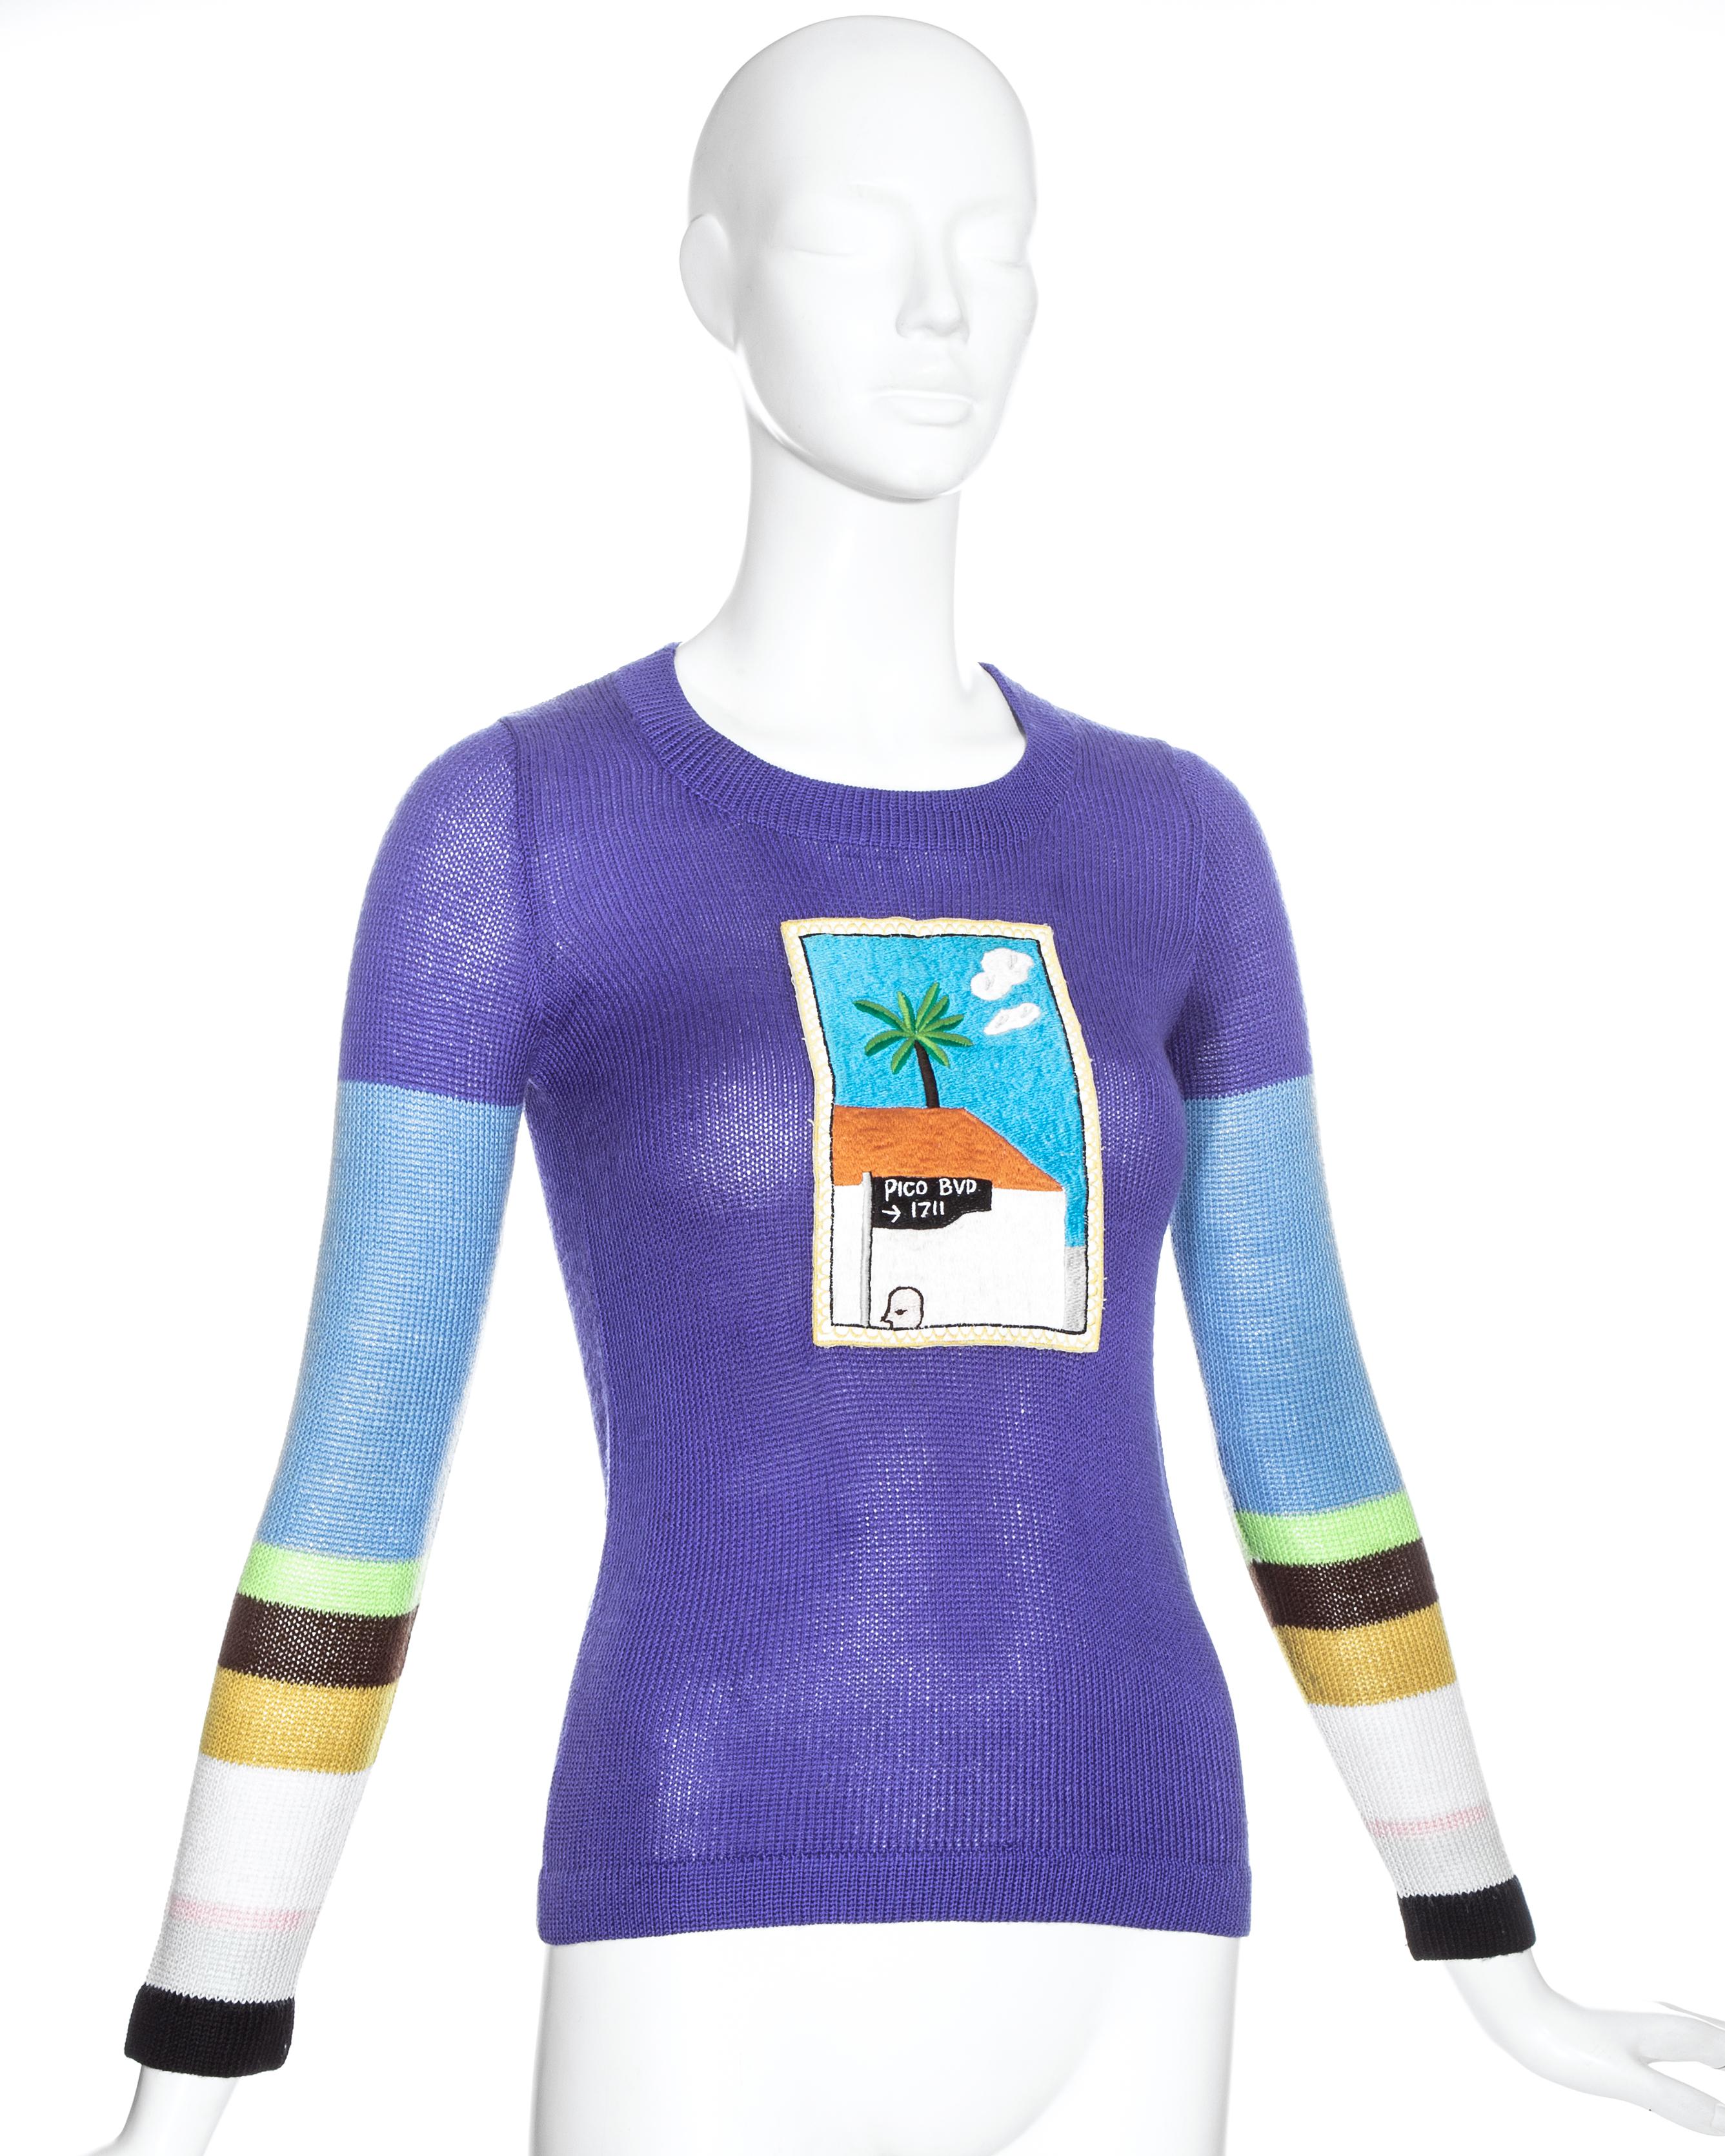 David Hockney x Ritva embroidered multicoloured acrylic sweater, c. 1971  In Excellent Condition For Sale In London, GB